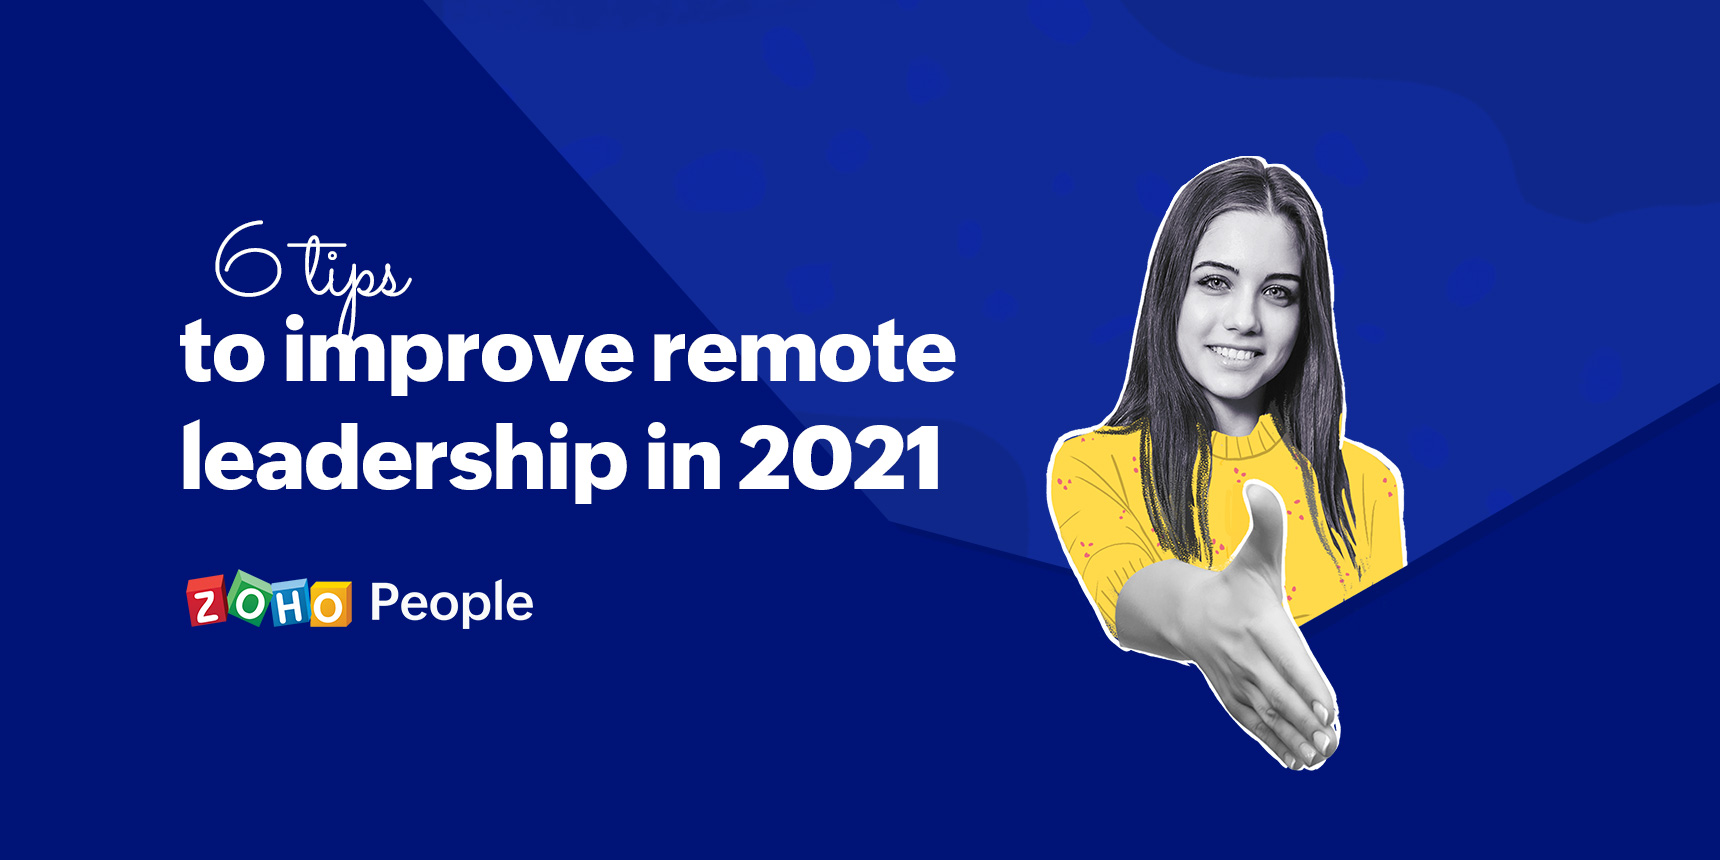 Tips to improve remote leadership in 2021